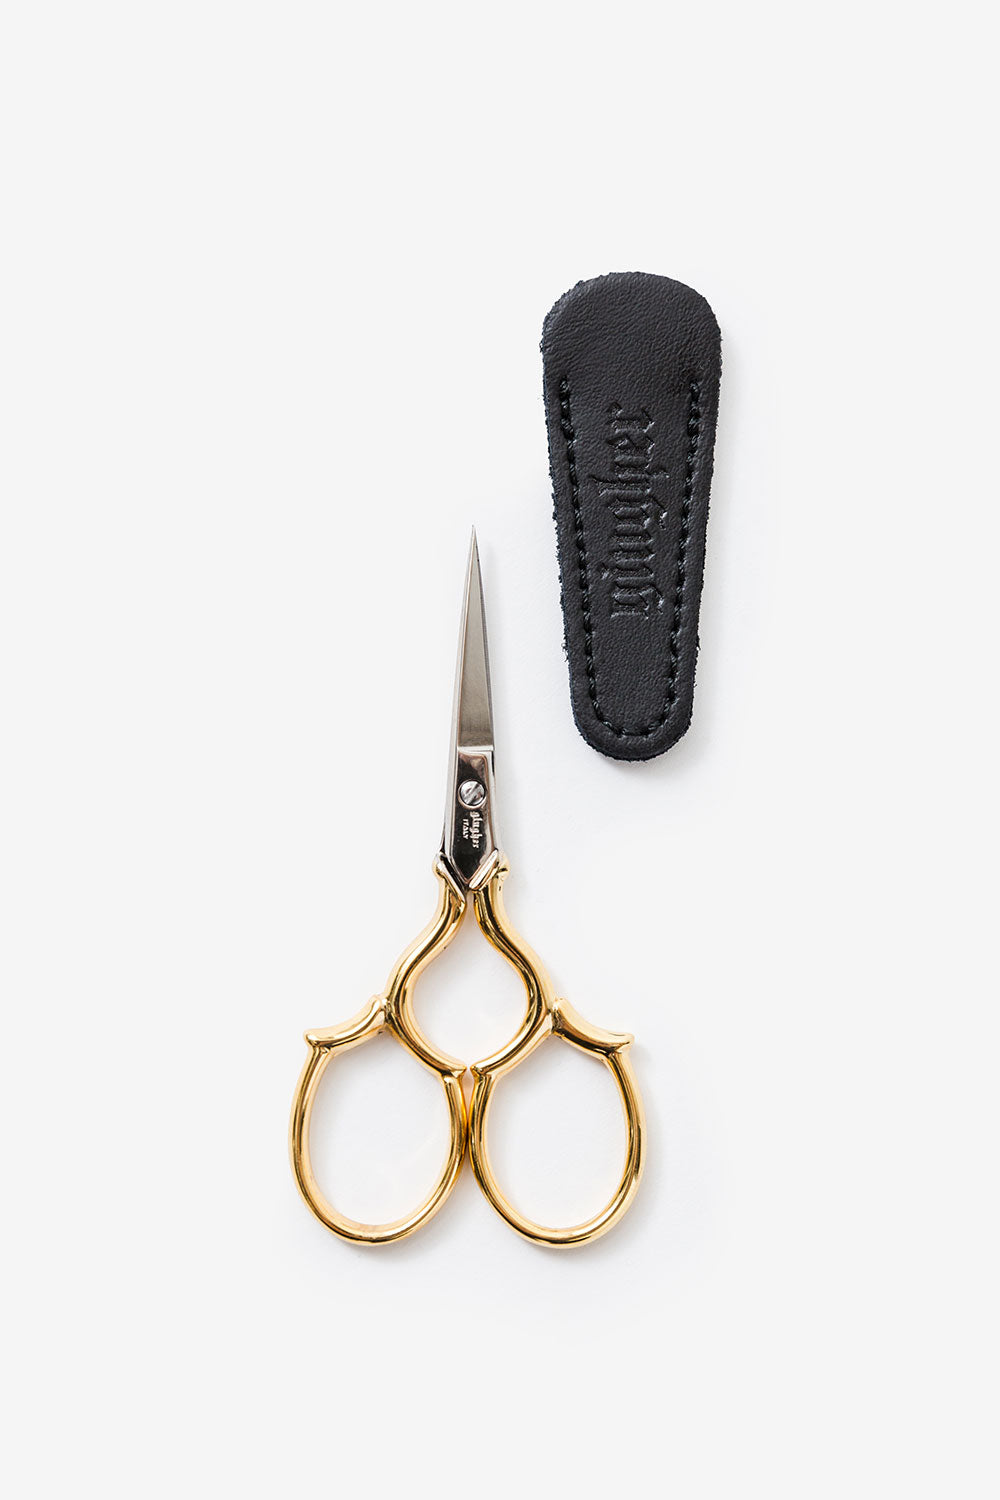 Gingher Epaulette Embroidery Scissors with Leather Sheath.